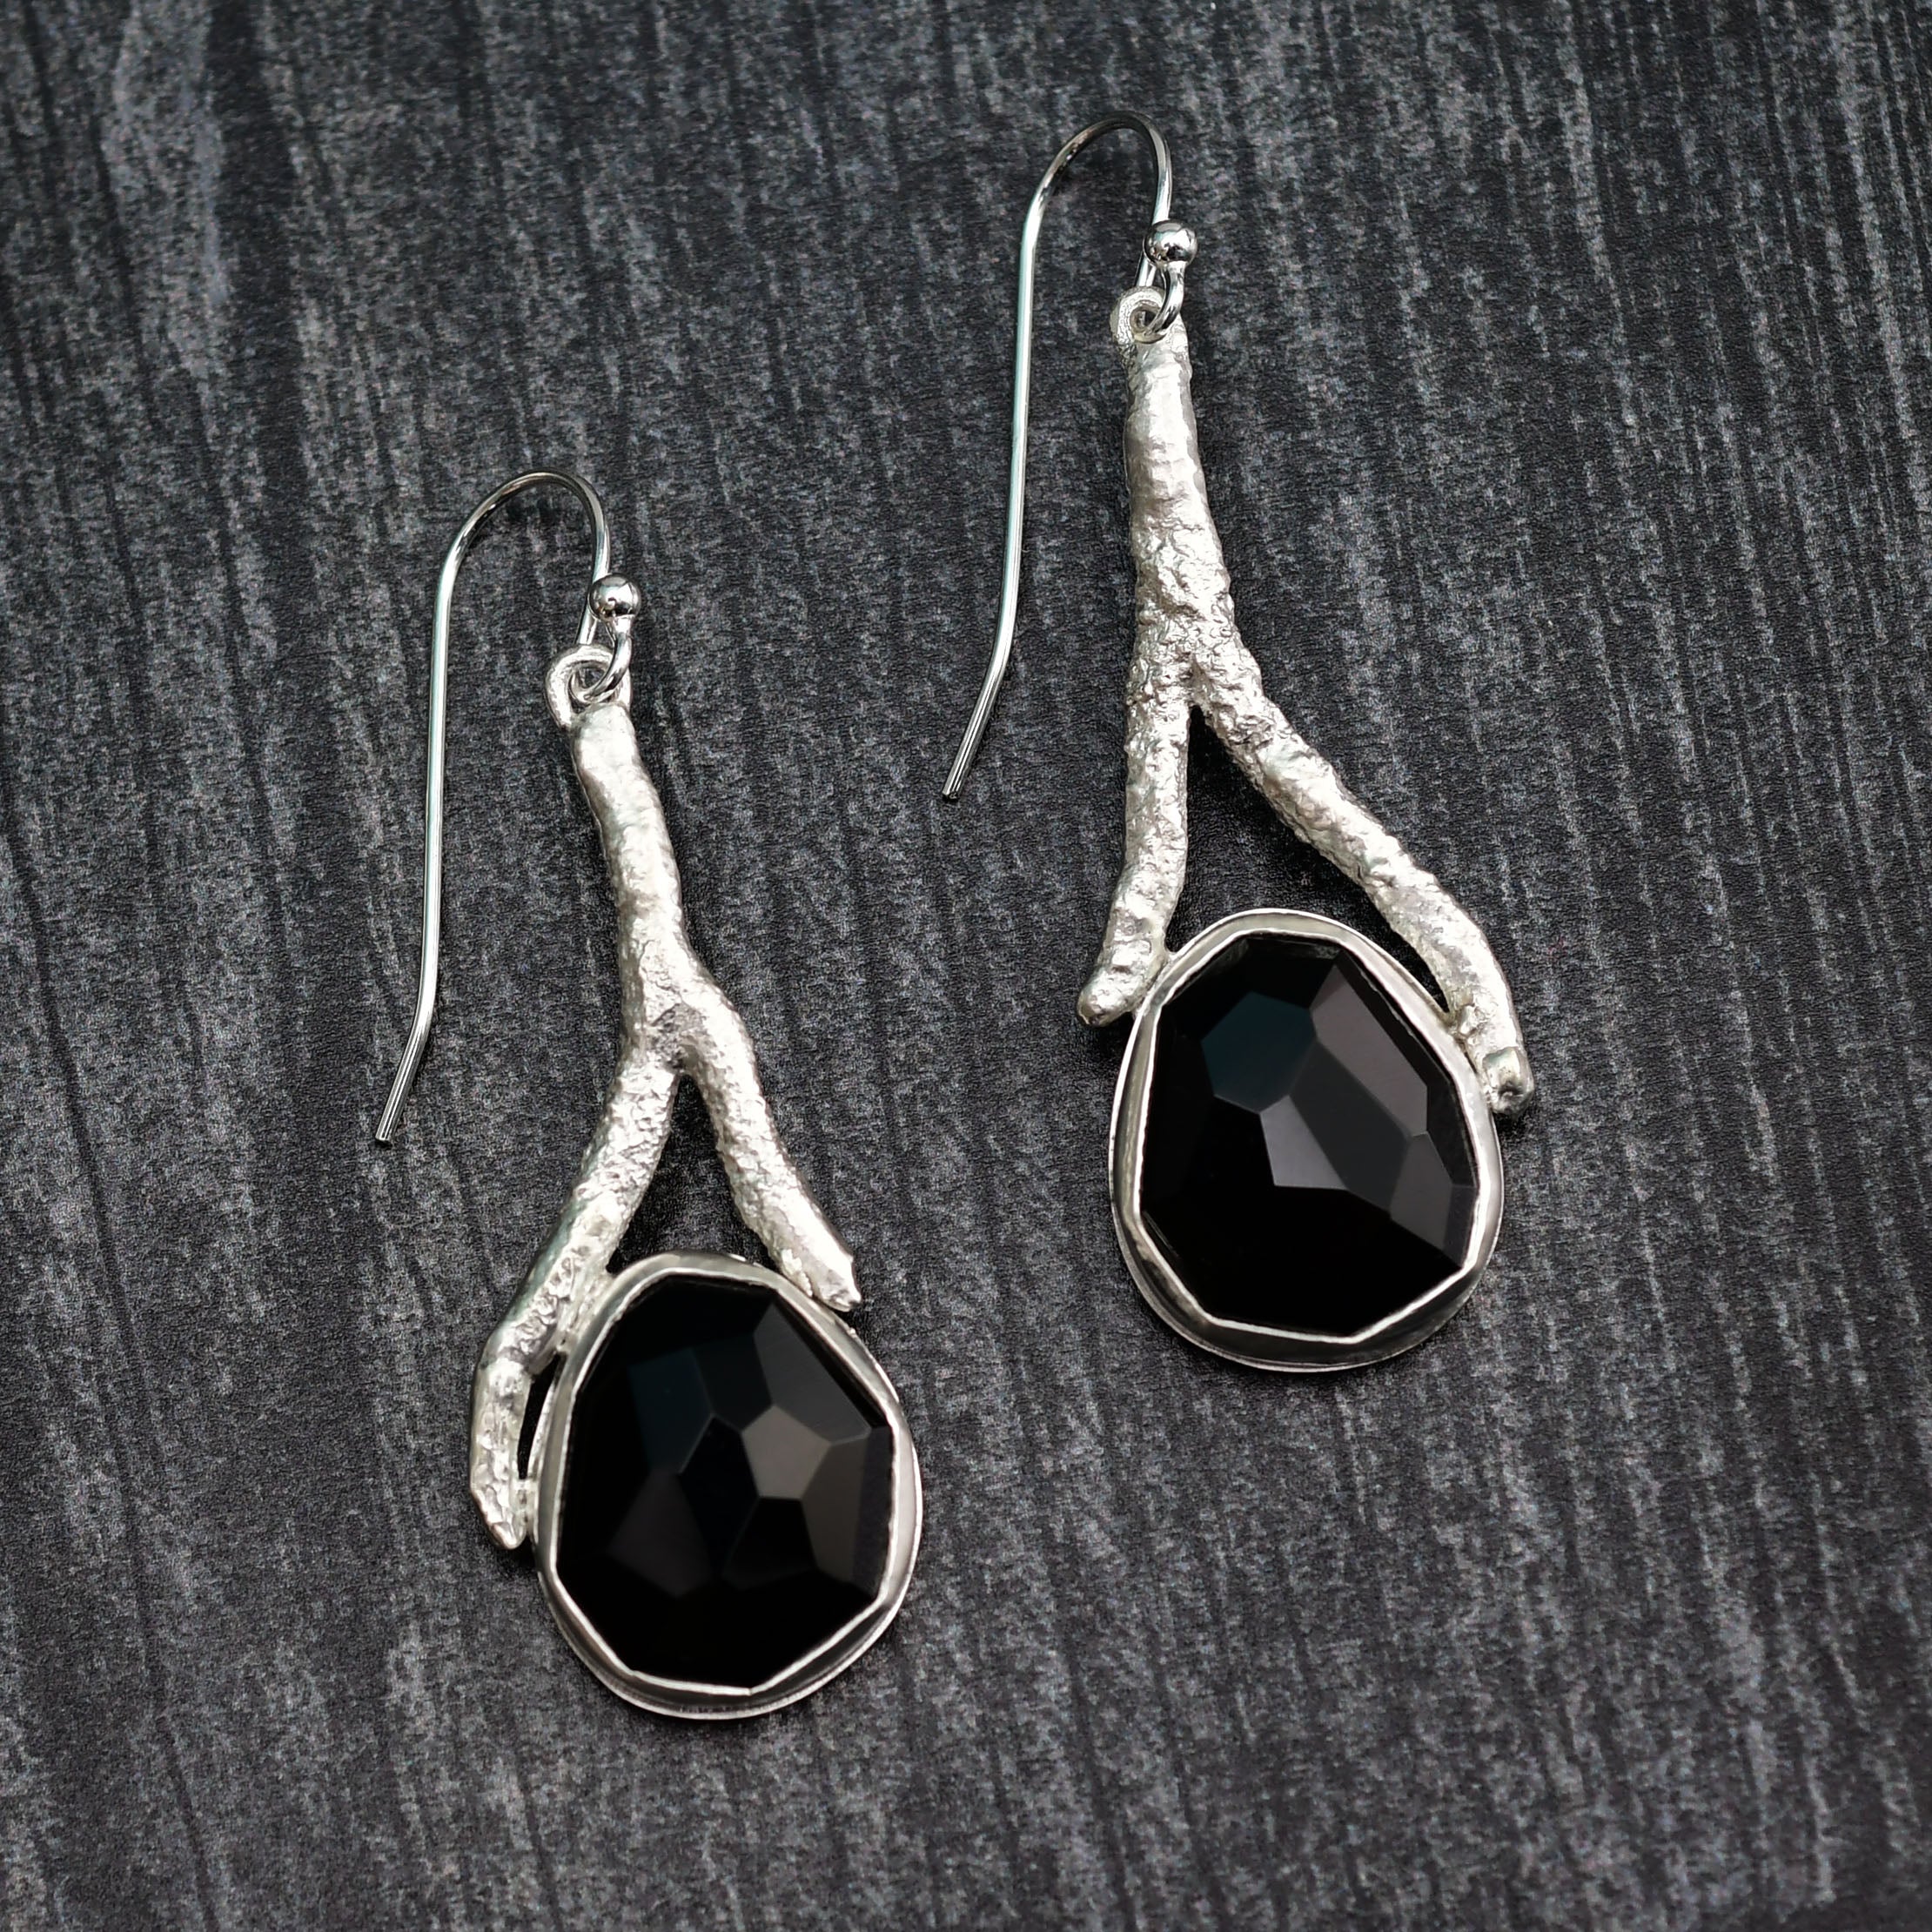 Rose Cut Black Onyx Earrings and Fused Sterling Silver